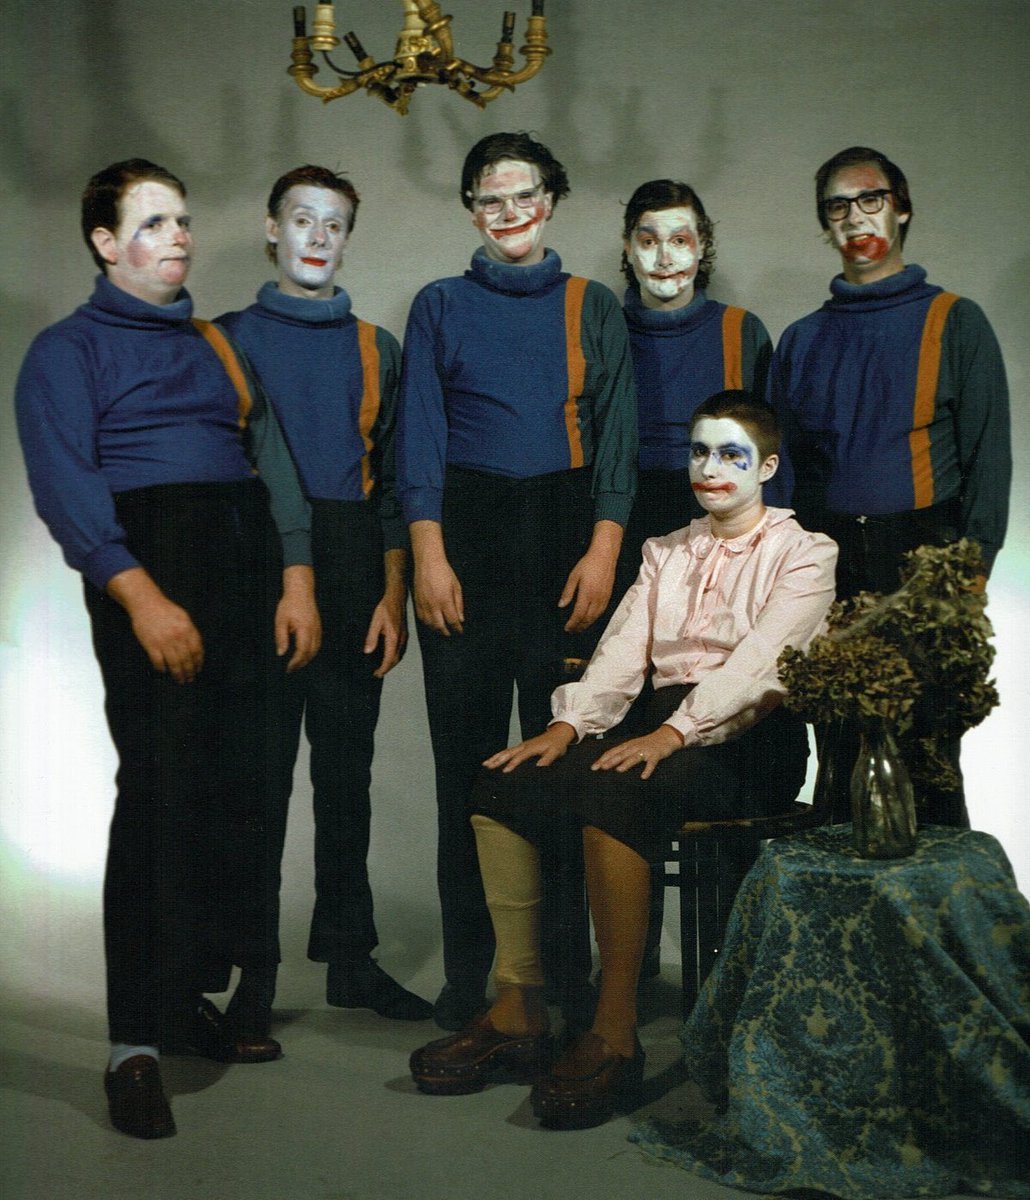 #top200progartists
168: Cardiacs
Perhaps not a band in the traditional prog rock vein but amongst the most inventive of the bands on this list. Whilst Sparks, Split Enz and 10CC didn’t make the list, Cardiacs were just a little bit “proggier”…
#ProgRock